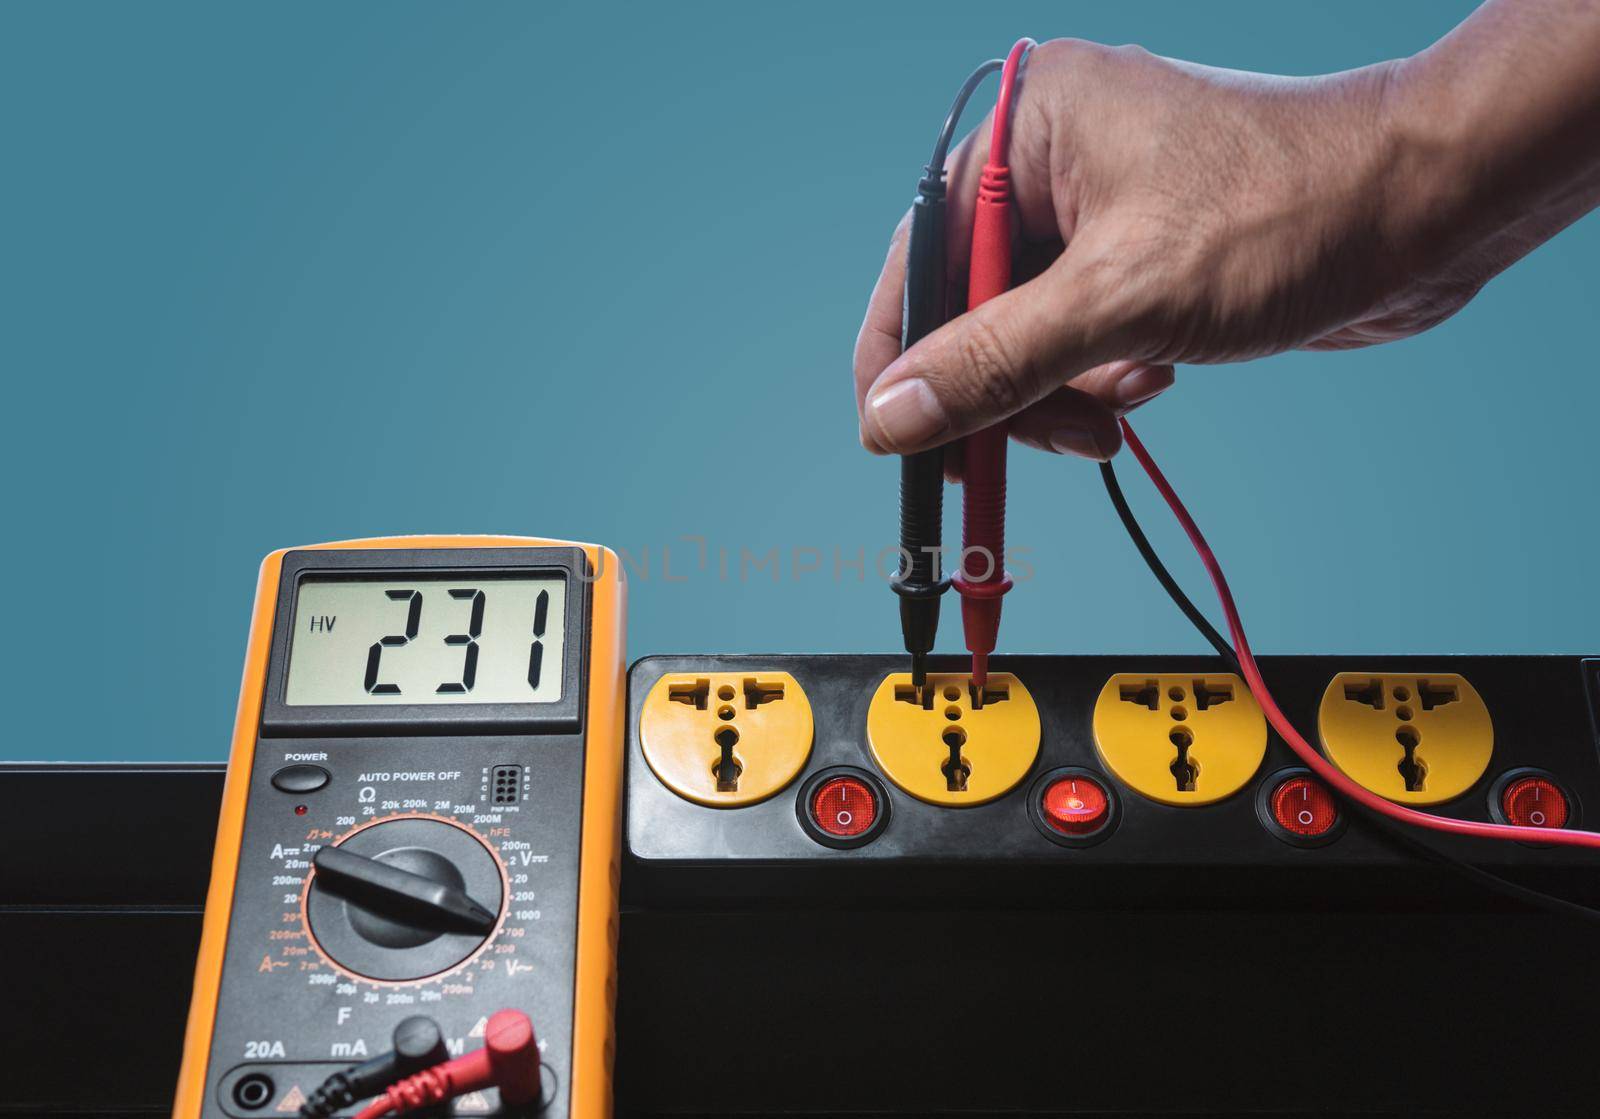 Measure the AC voltage of 230 Volts from the power outlet with a digital meter. by wattanaphob